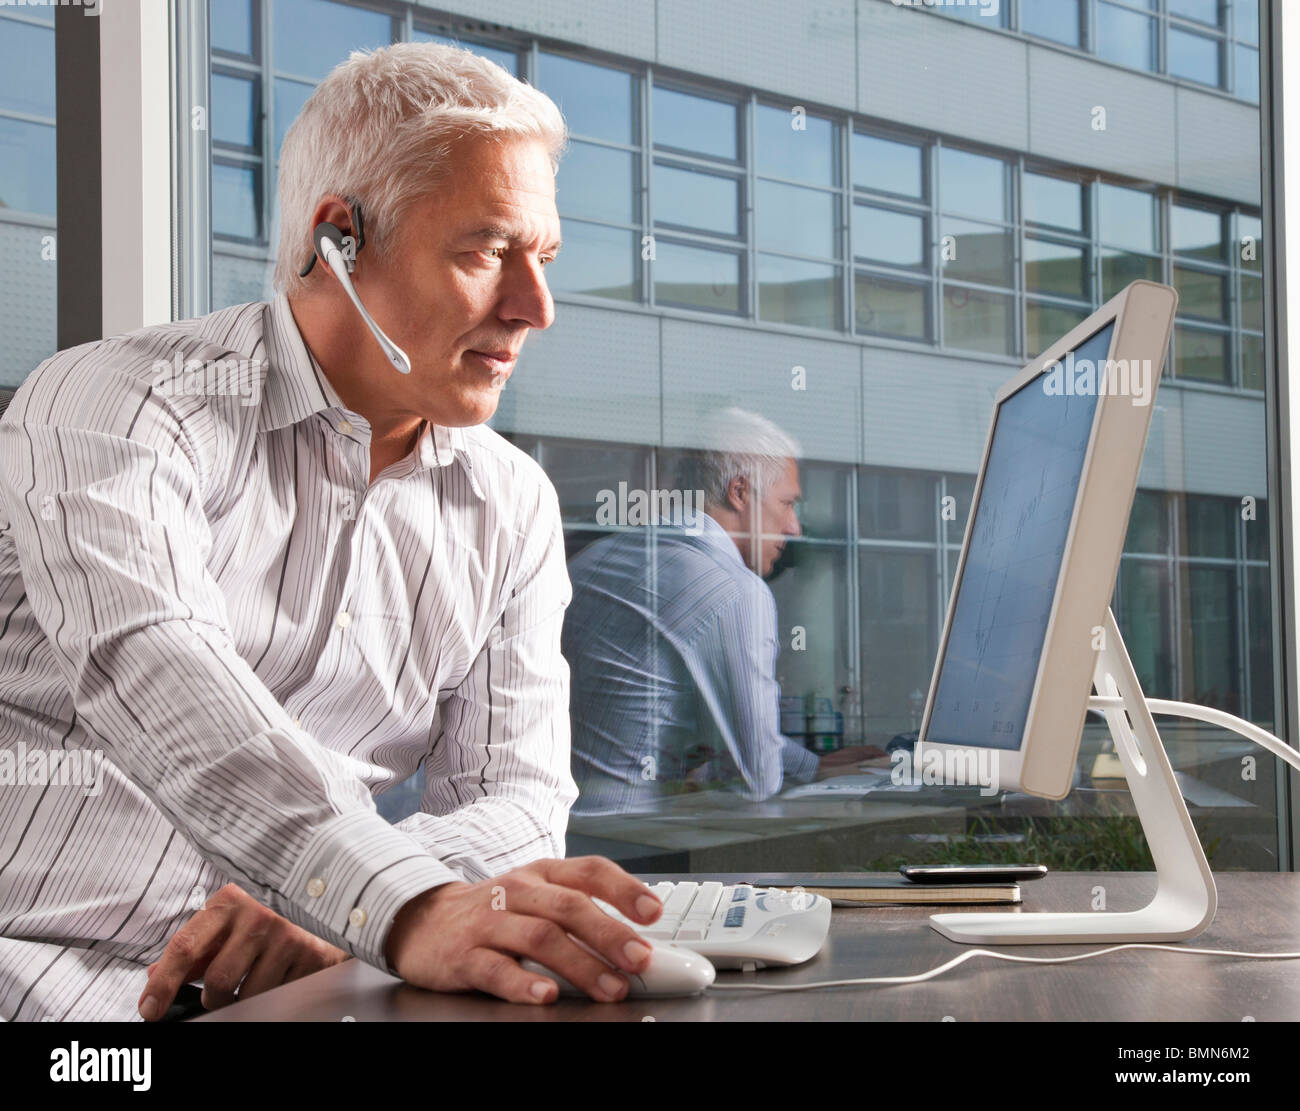 Man with headset working on computer Stock Photo